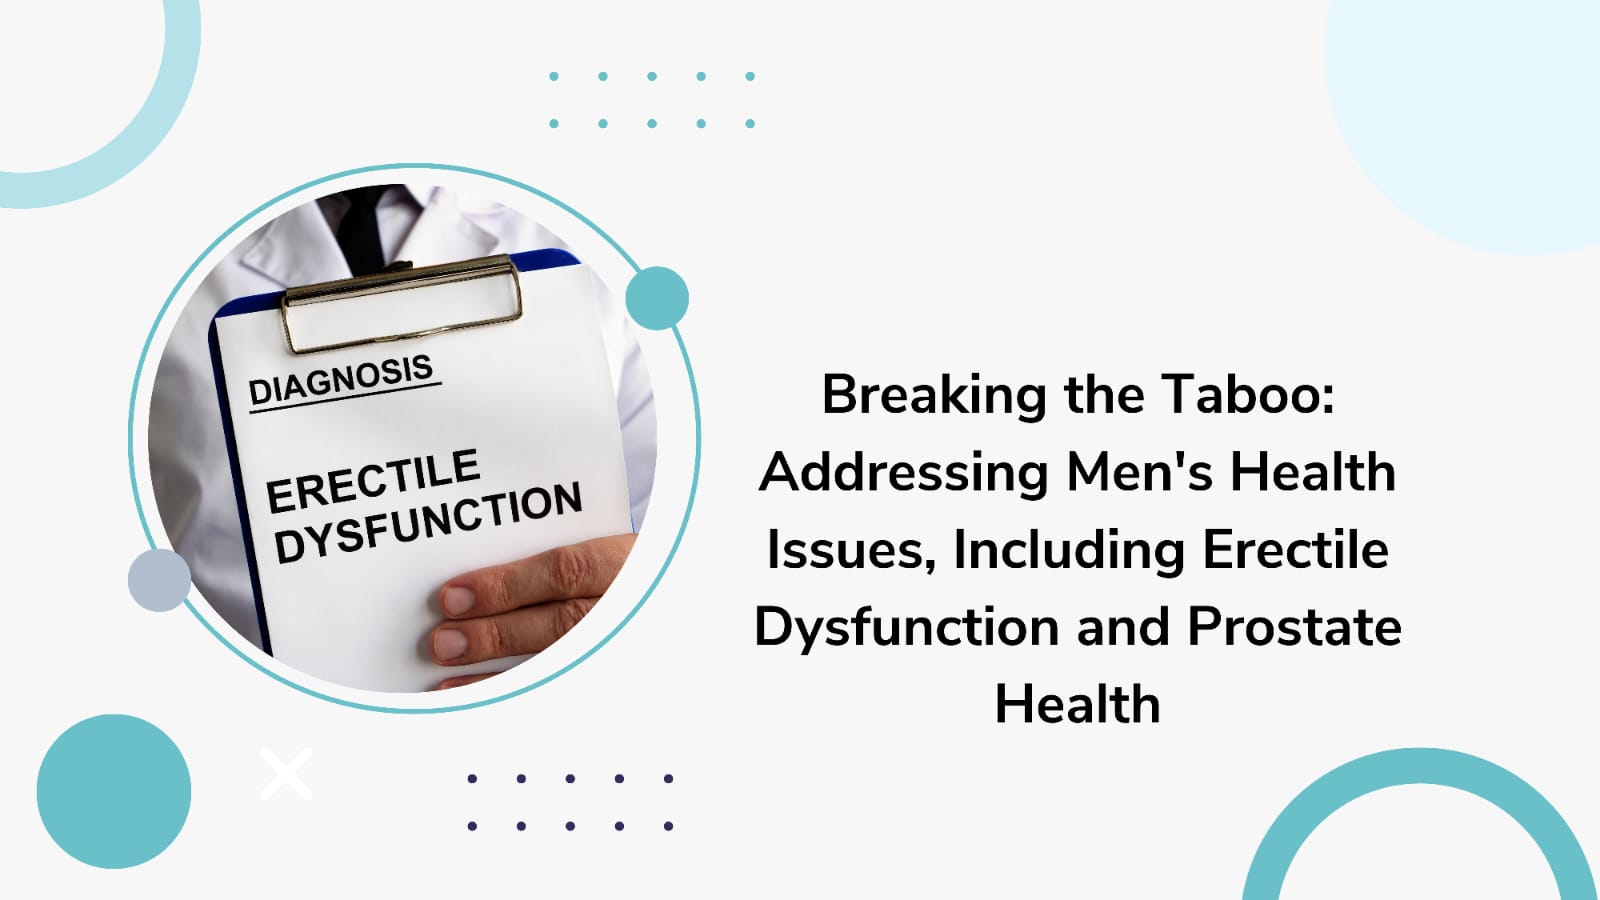 Erectile Dysfunction and Prostate Health